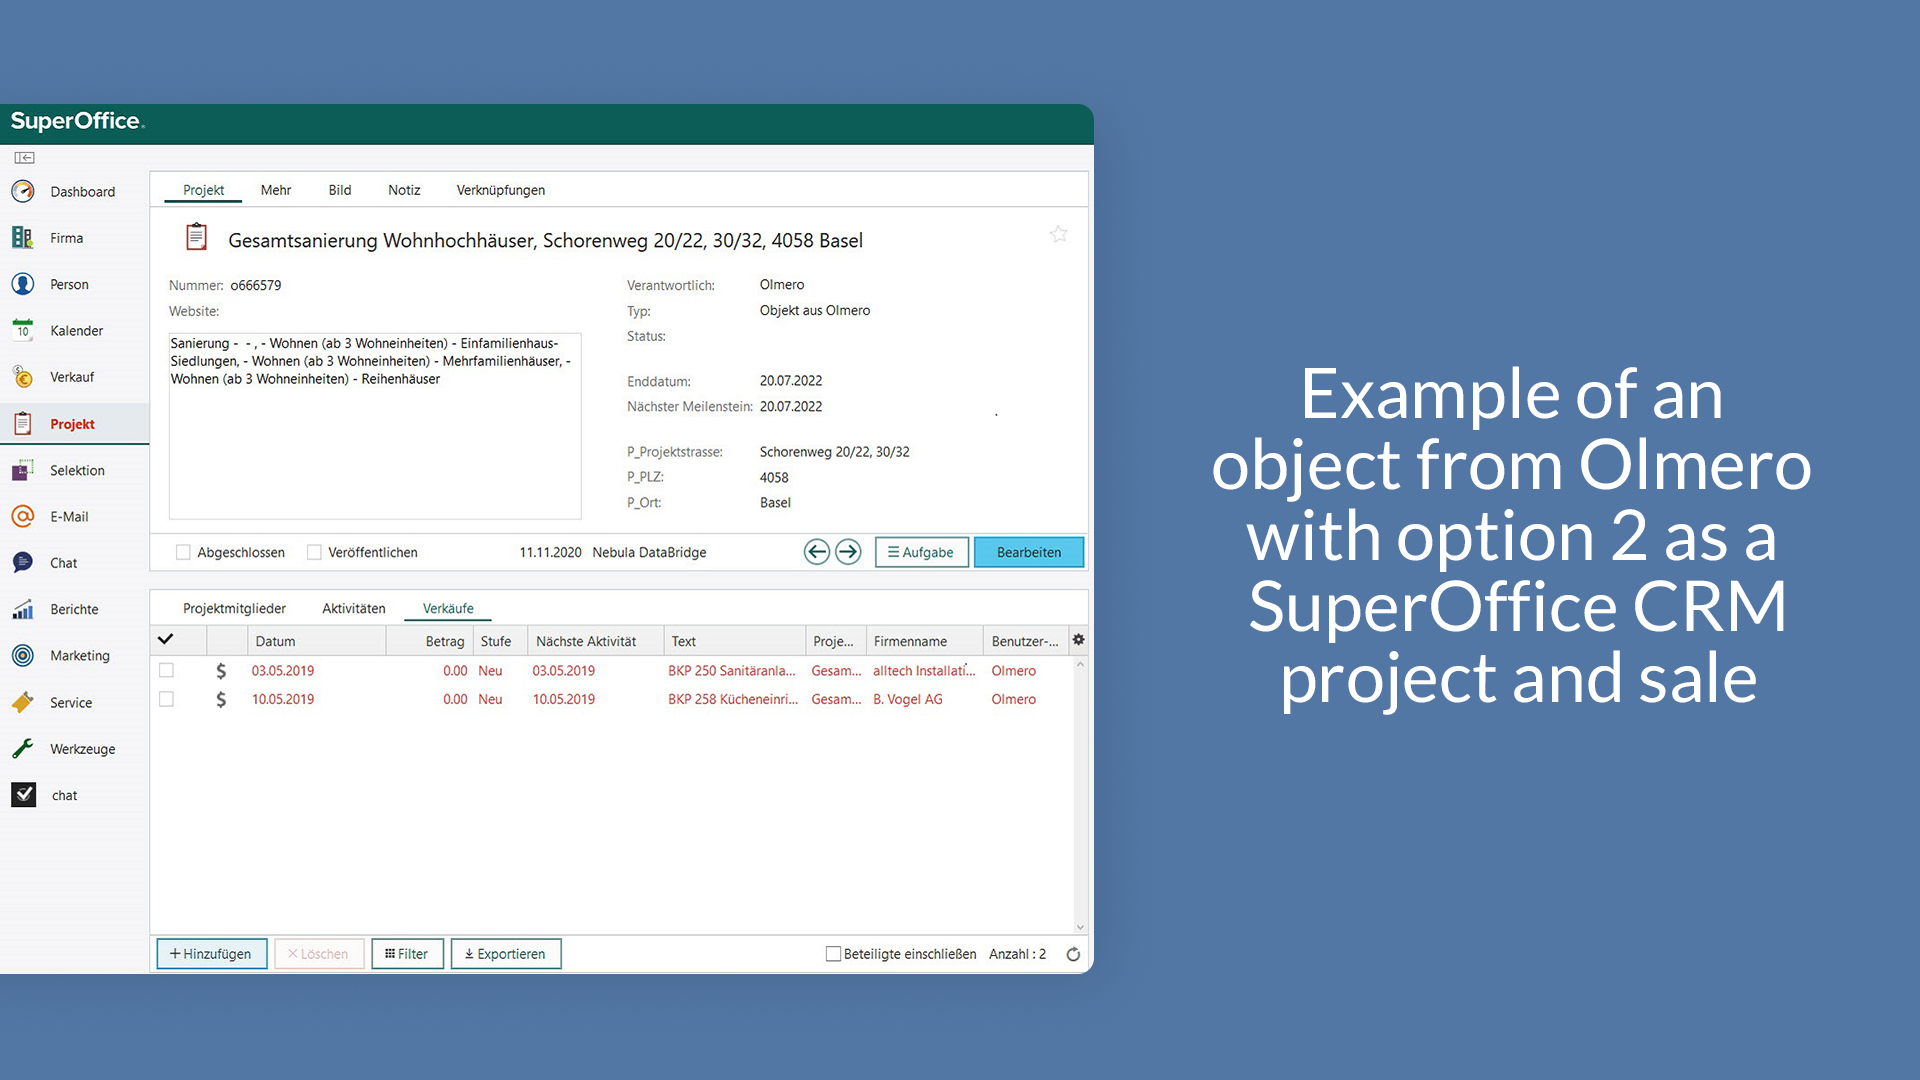 6. Example of an object from Olmero with Option2 as a SuperOffice CRM project and sale